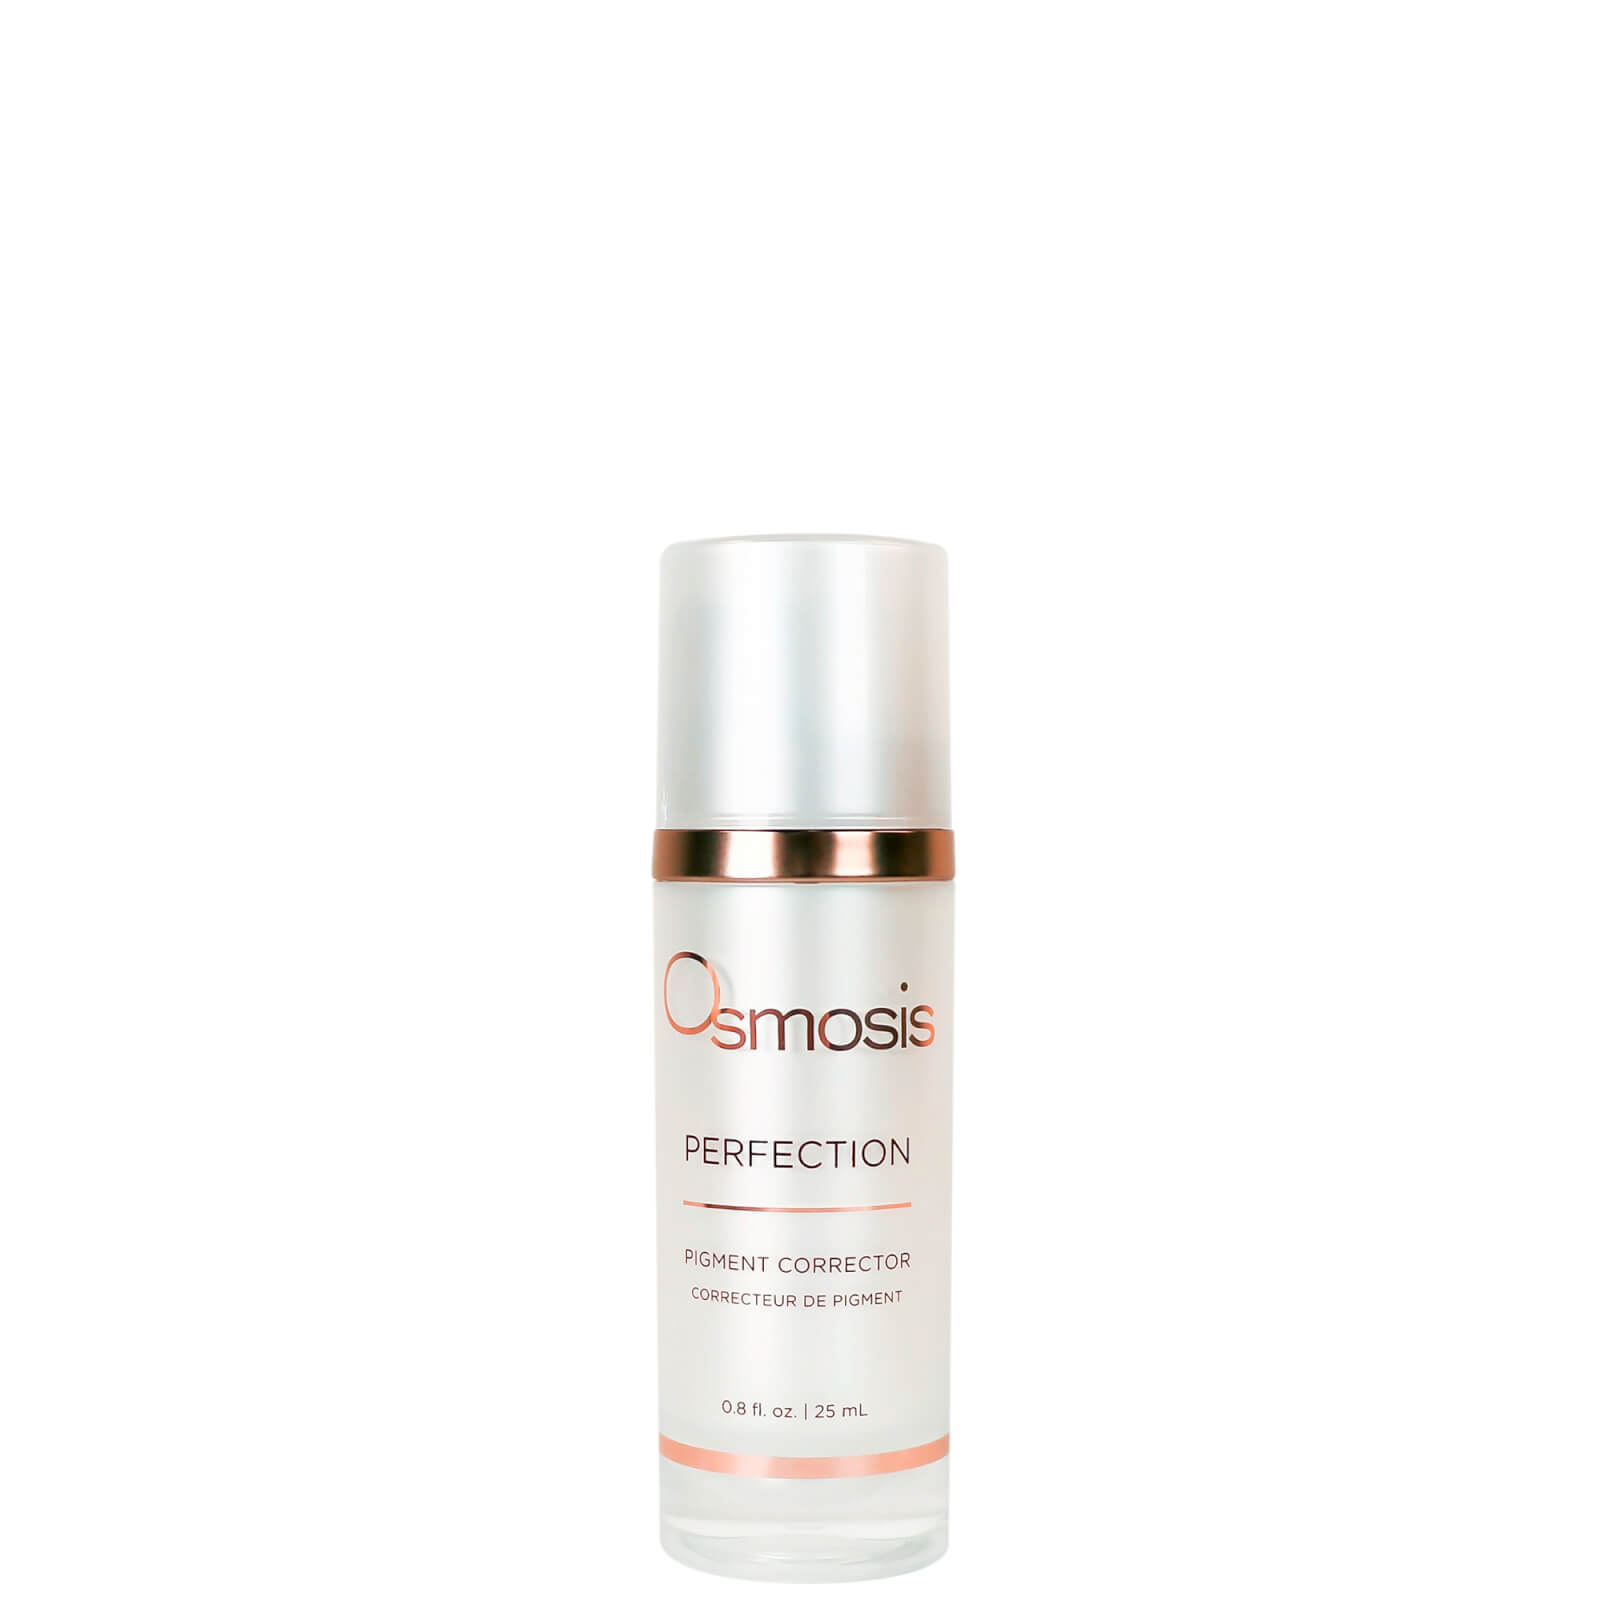 Osmosis Beauty Perfection Pigment Corrector